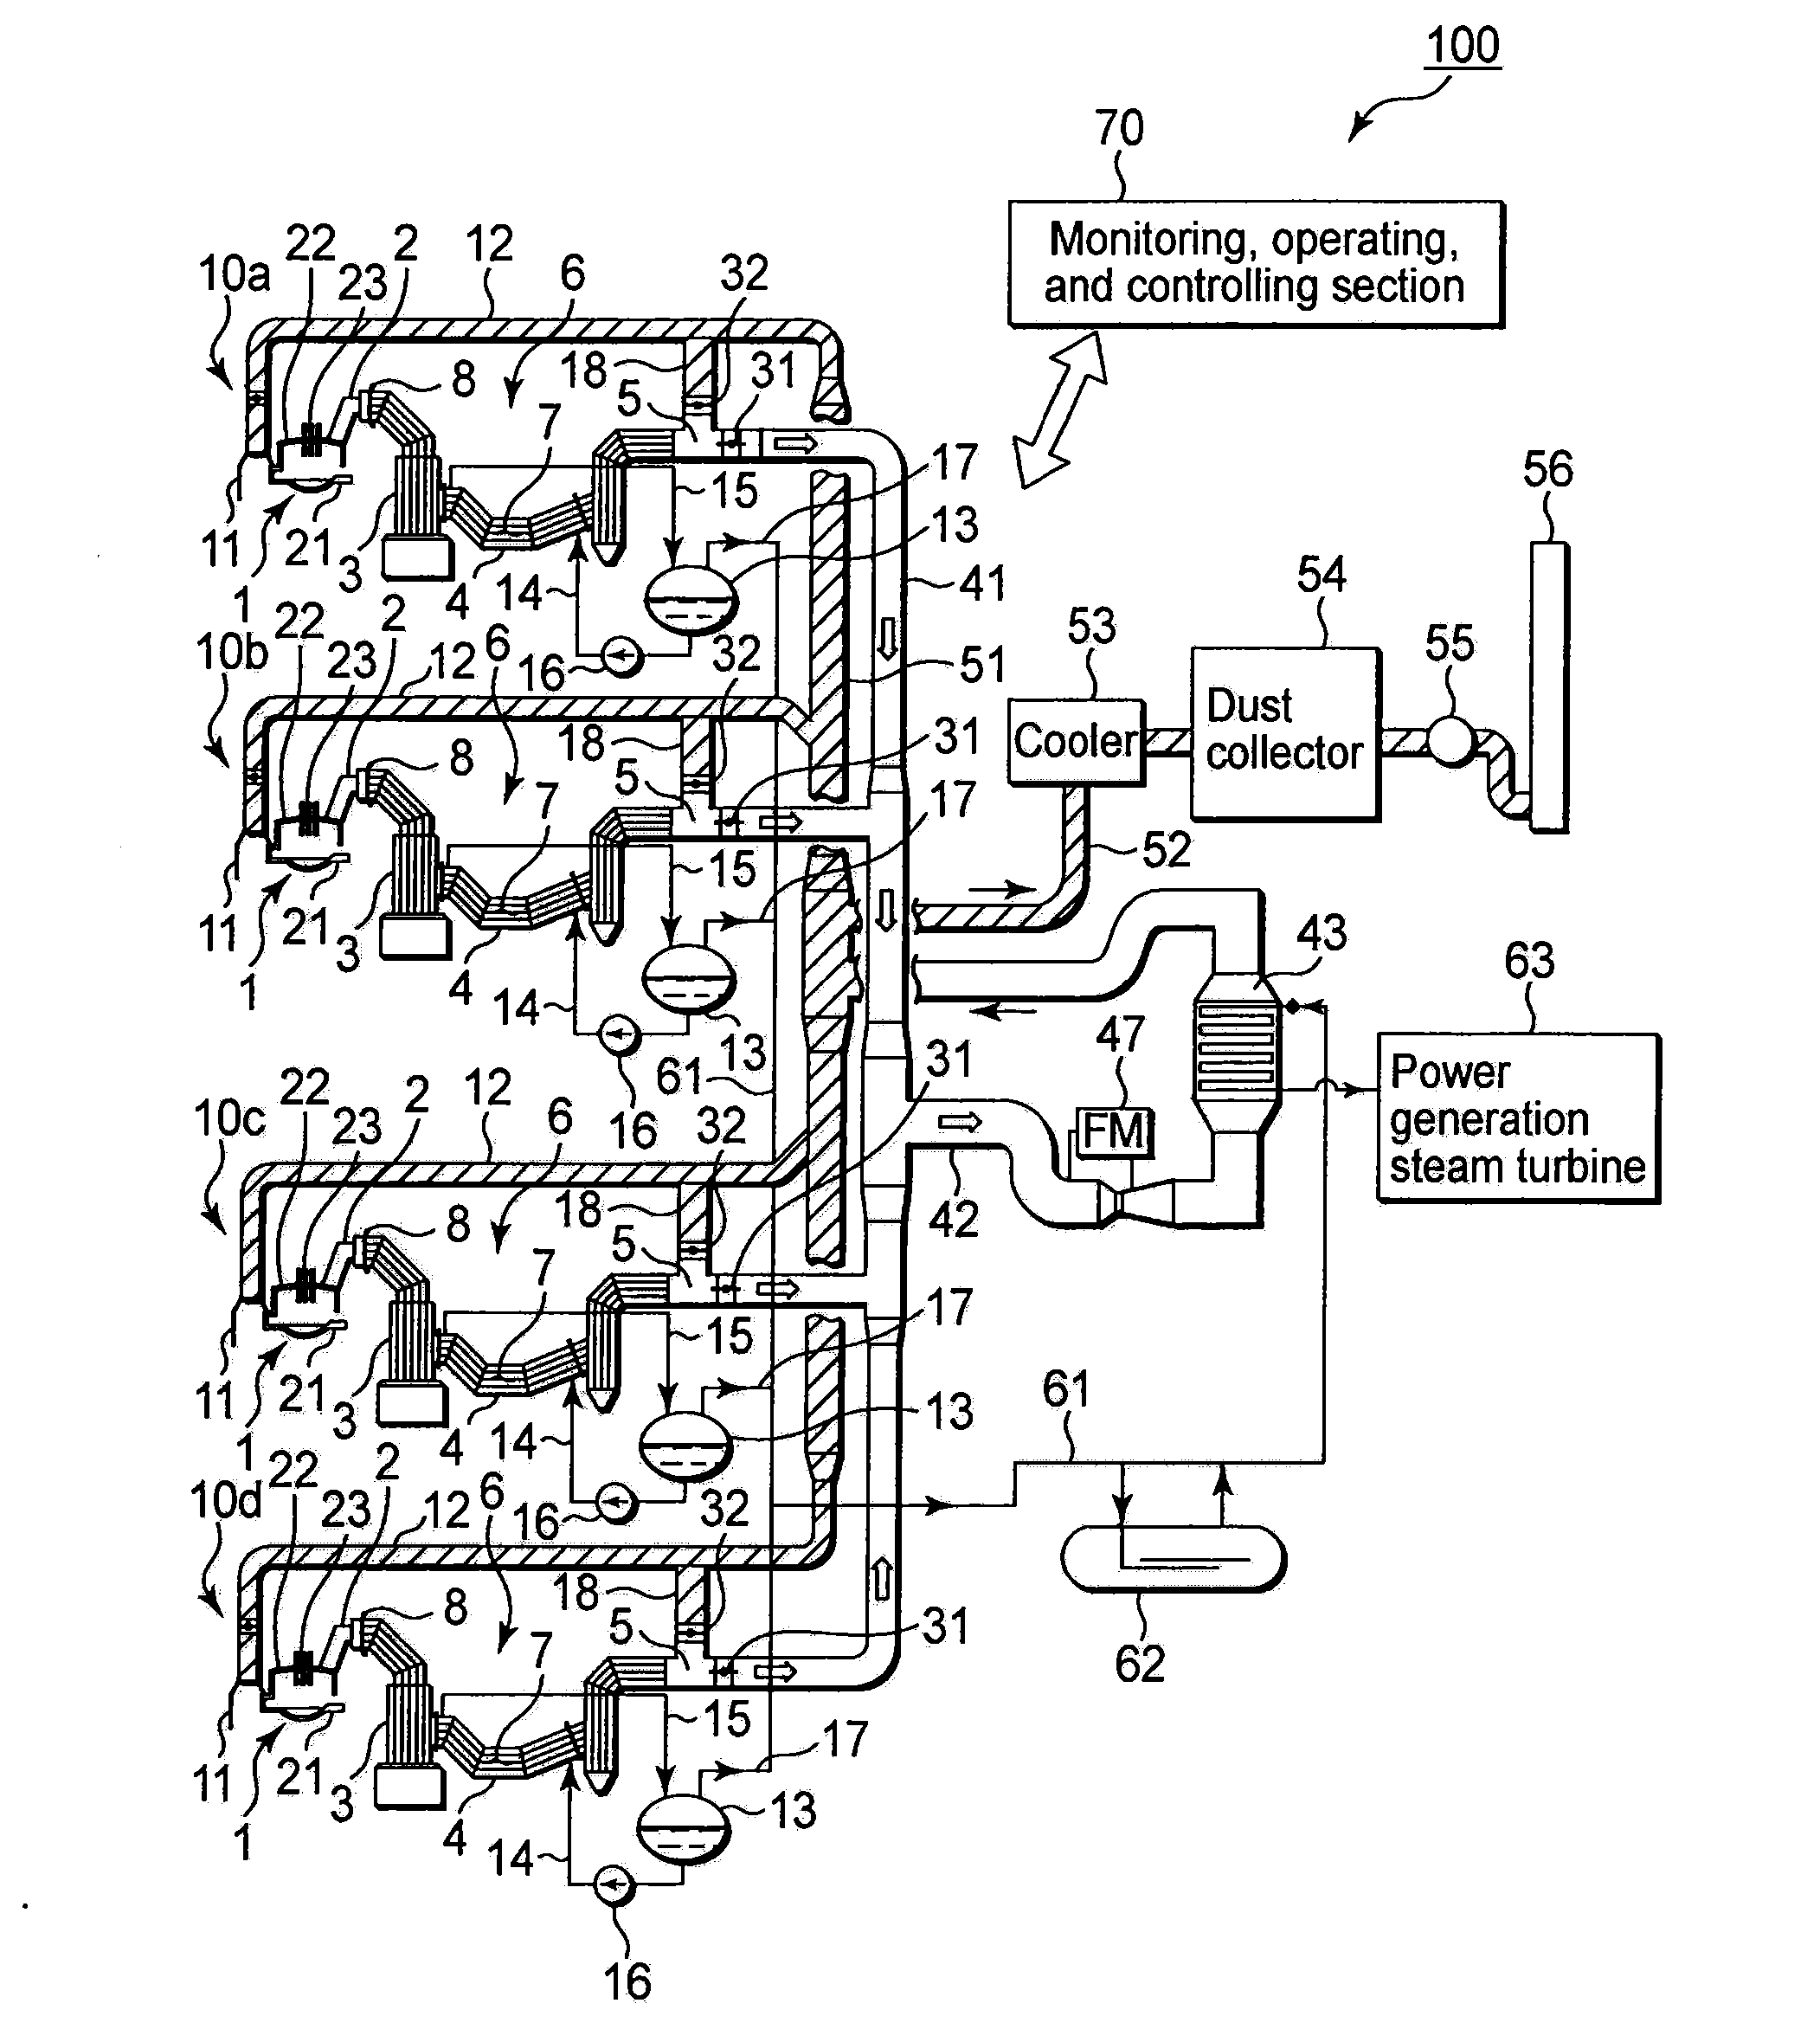 Waste heat recovery structure for steel making electric arc furnaces, steel making electric arc furnace facility, and waste heat recovery method for steel making electric arc furnaces